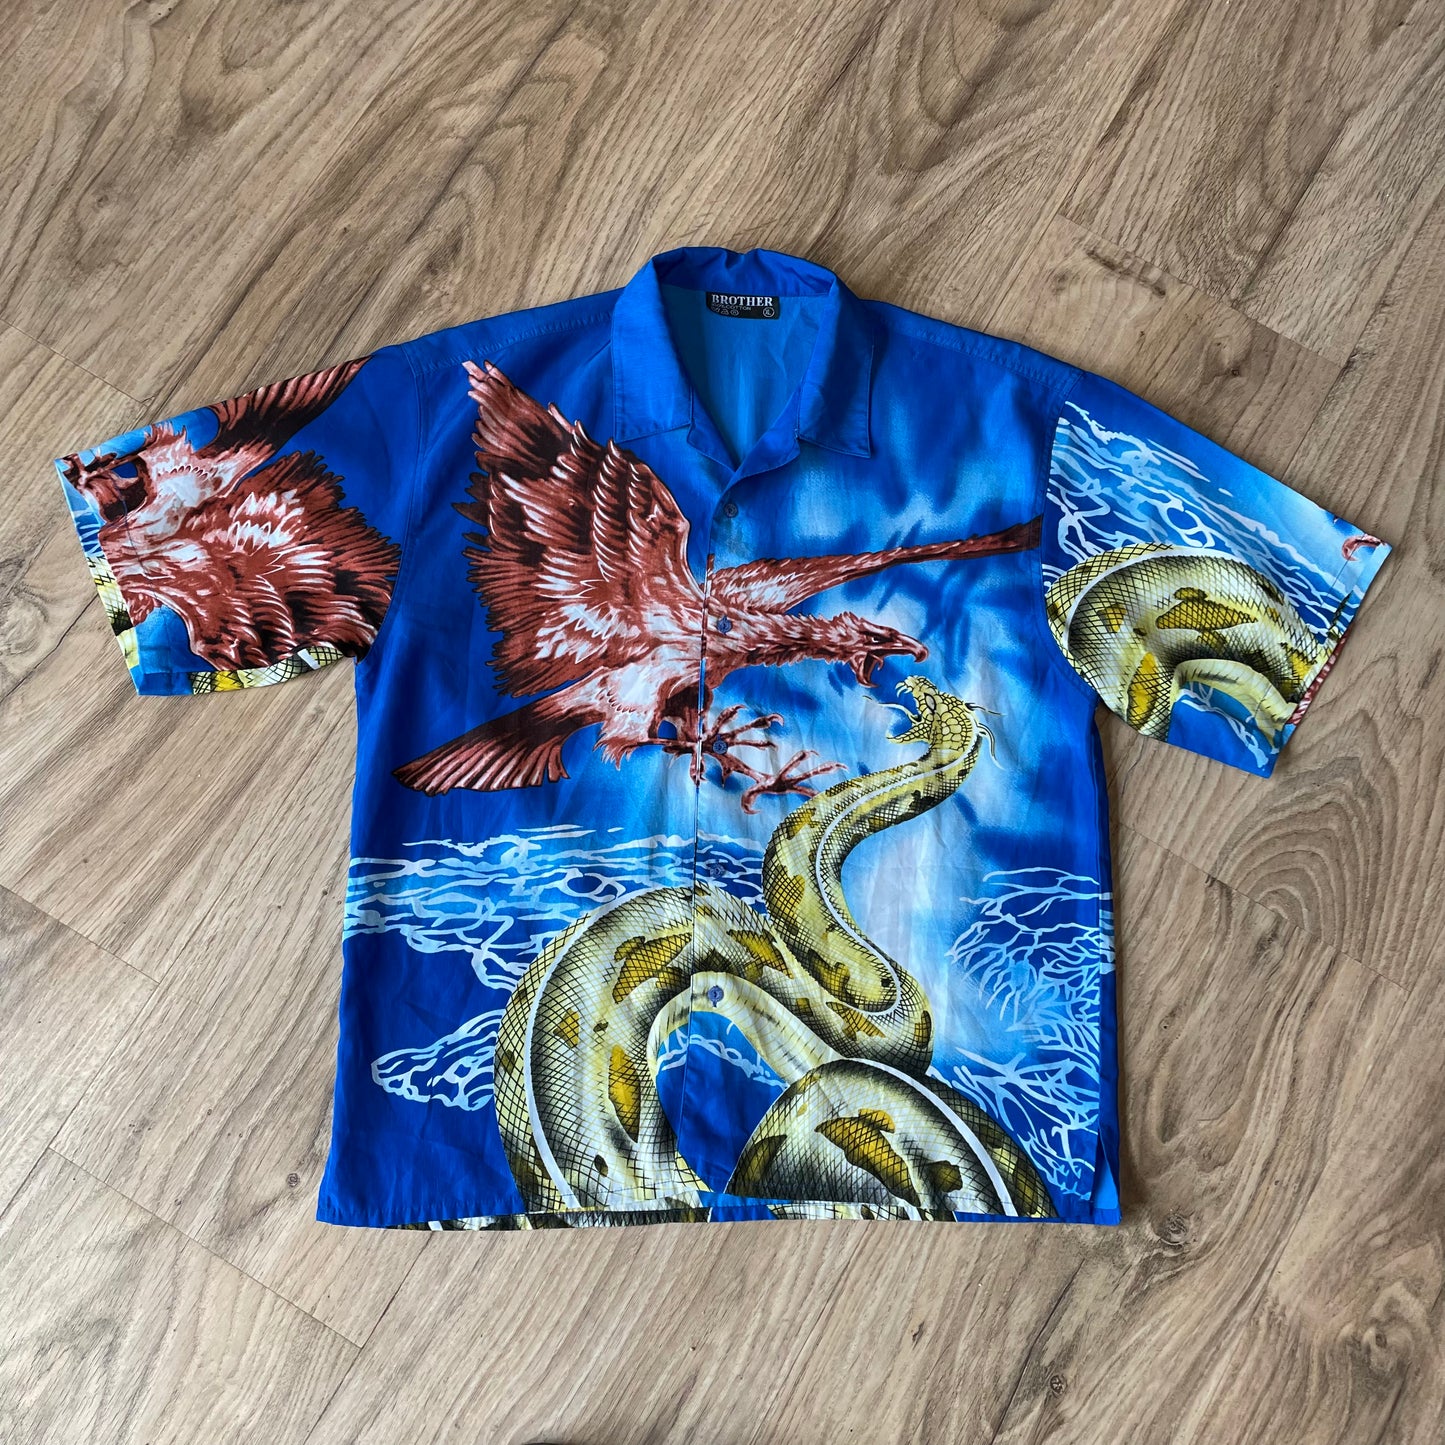 90s Graphic Eagle and Snake shirt